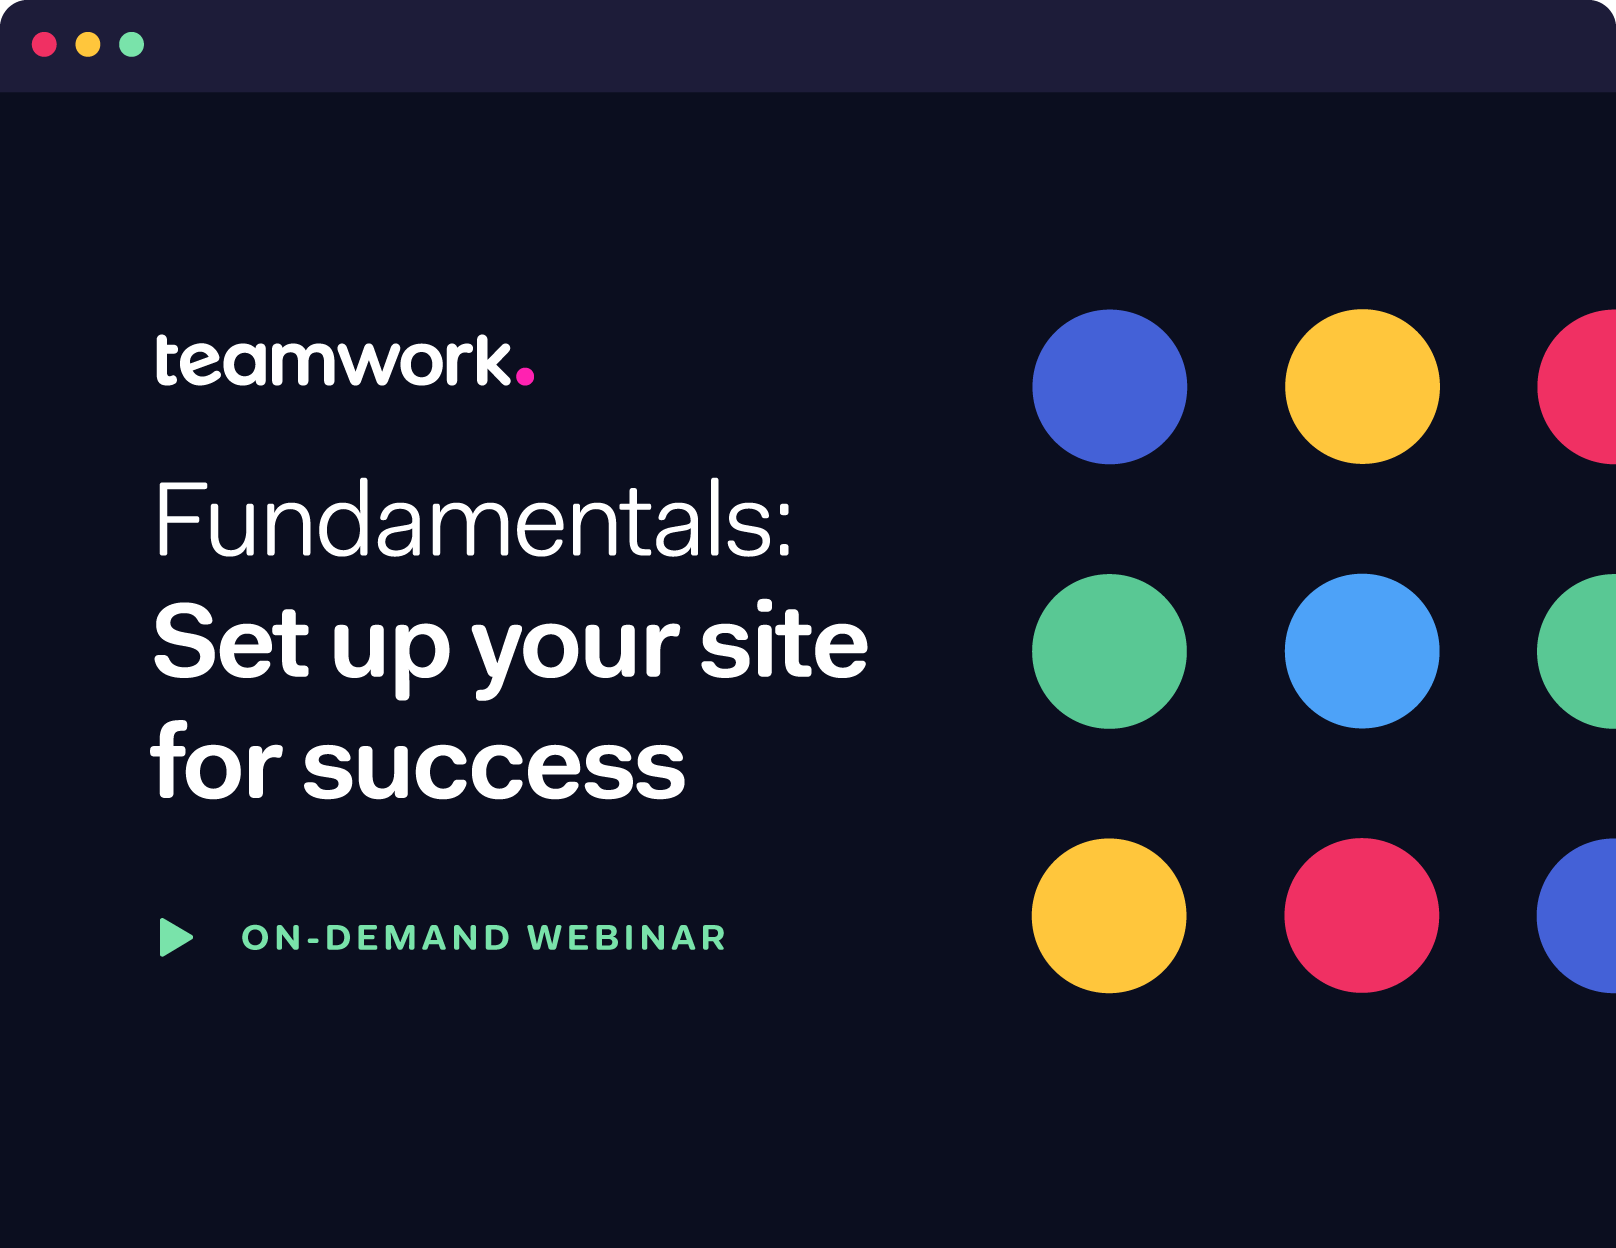 Fundamentals: Set up your site for success